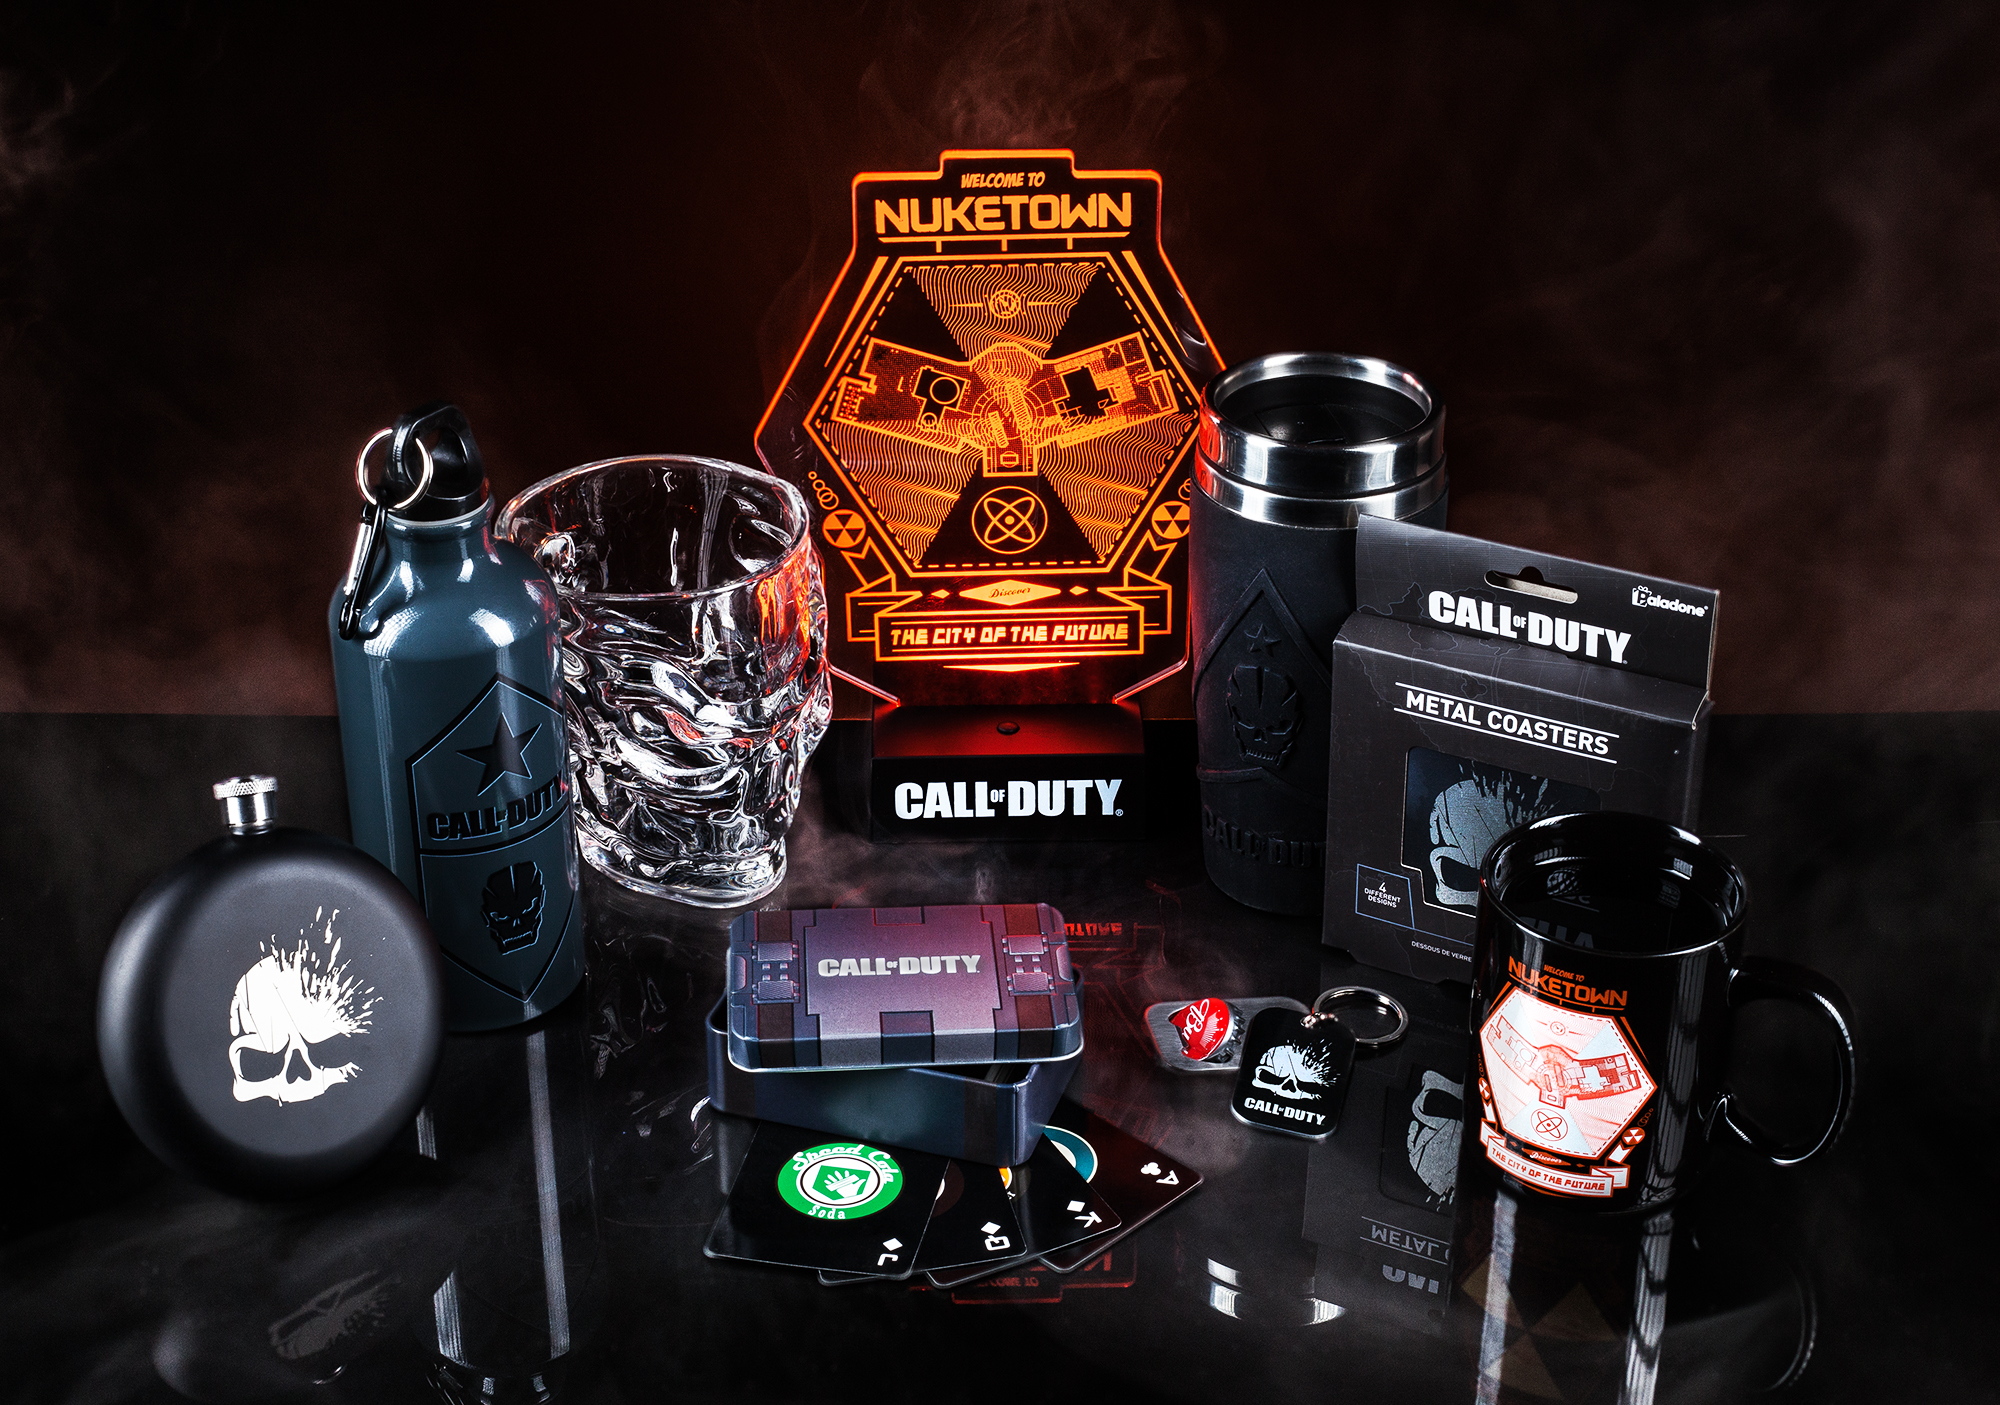 Paladone launch all new Call of Duty products ahead of Black Ops 4 release